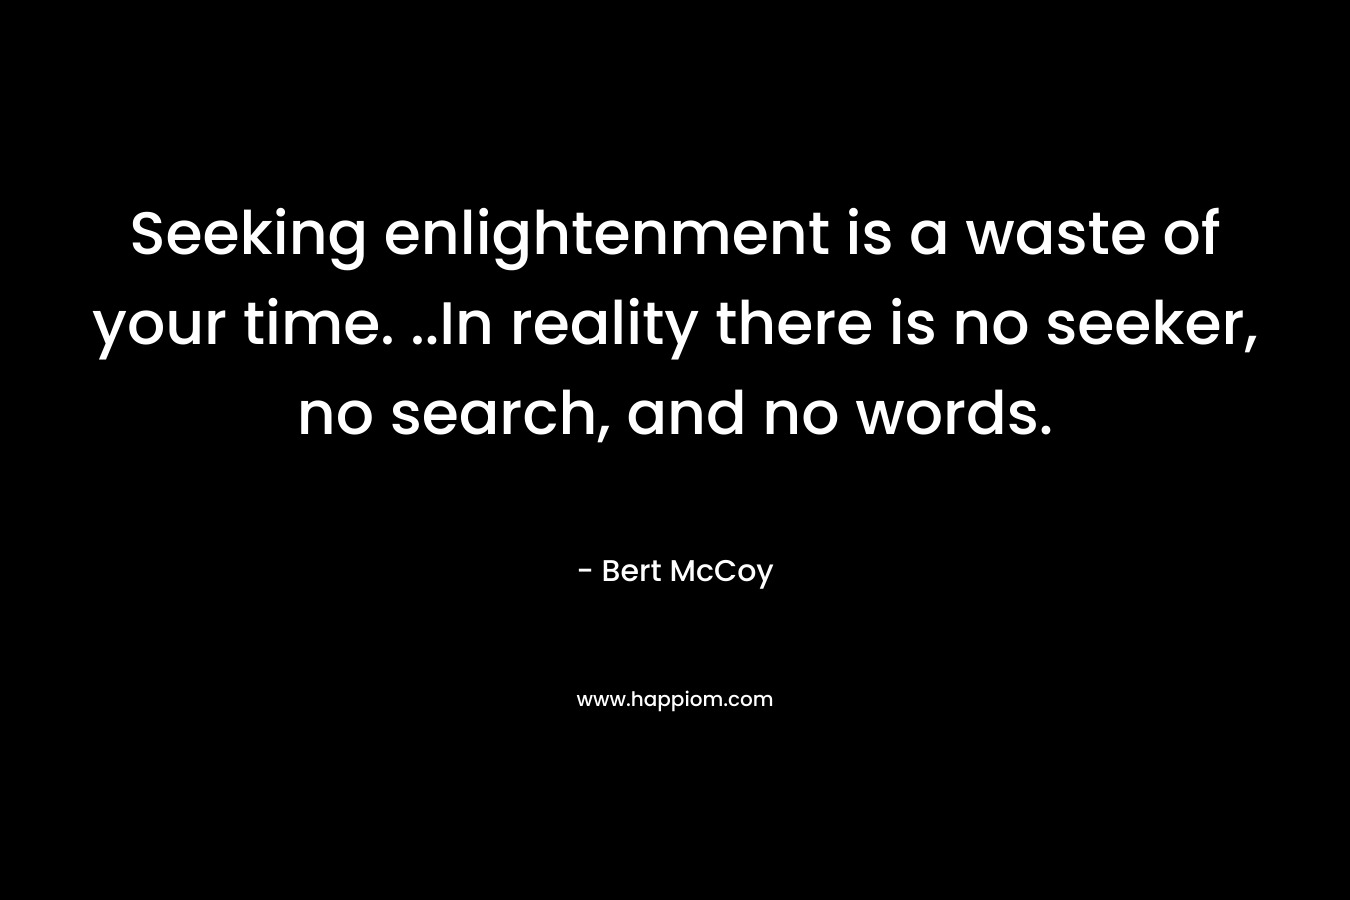 Seeking enlightenment is a waste of your time. ..In reality there is no seeker, no search, and no words. – Bert McCoy